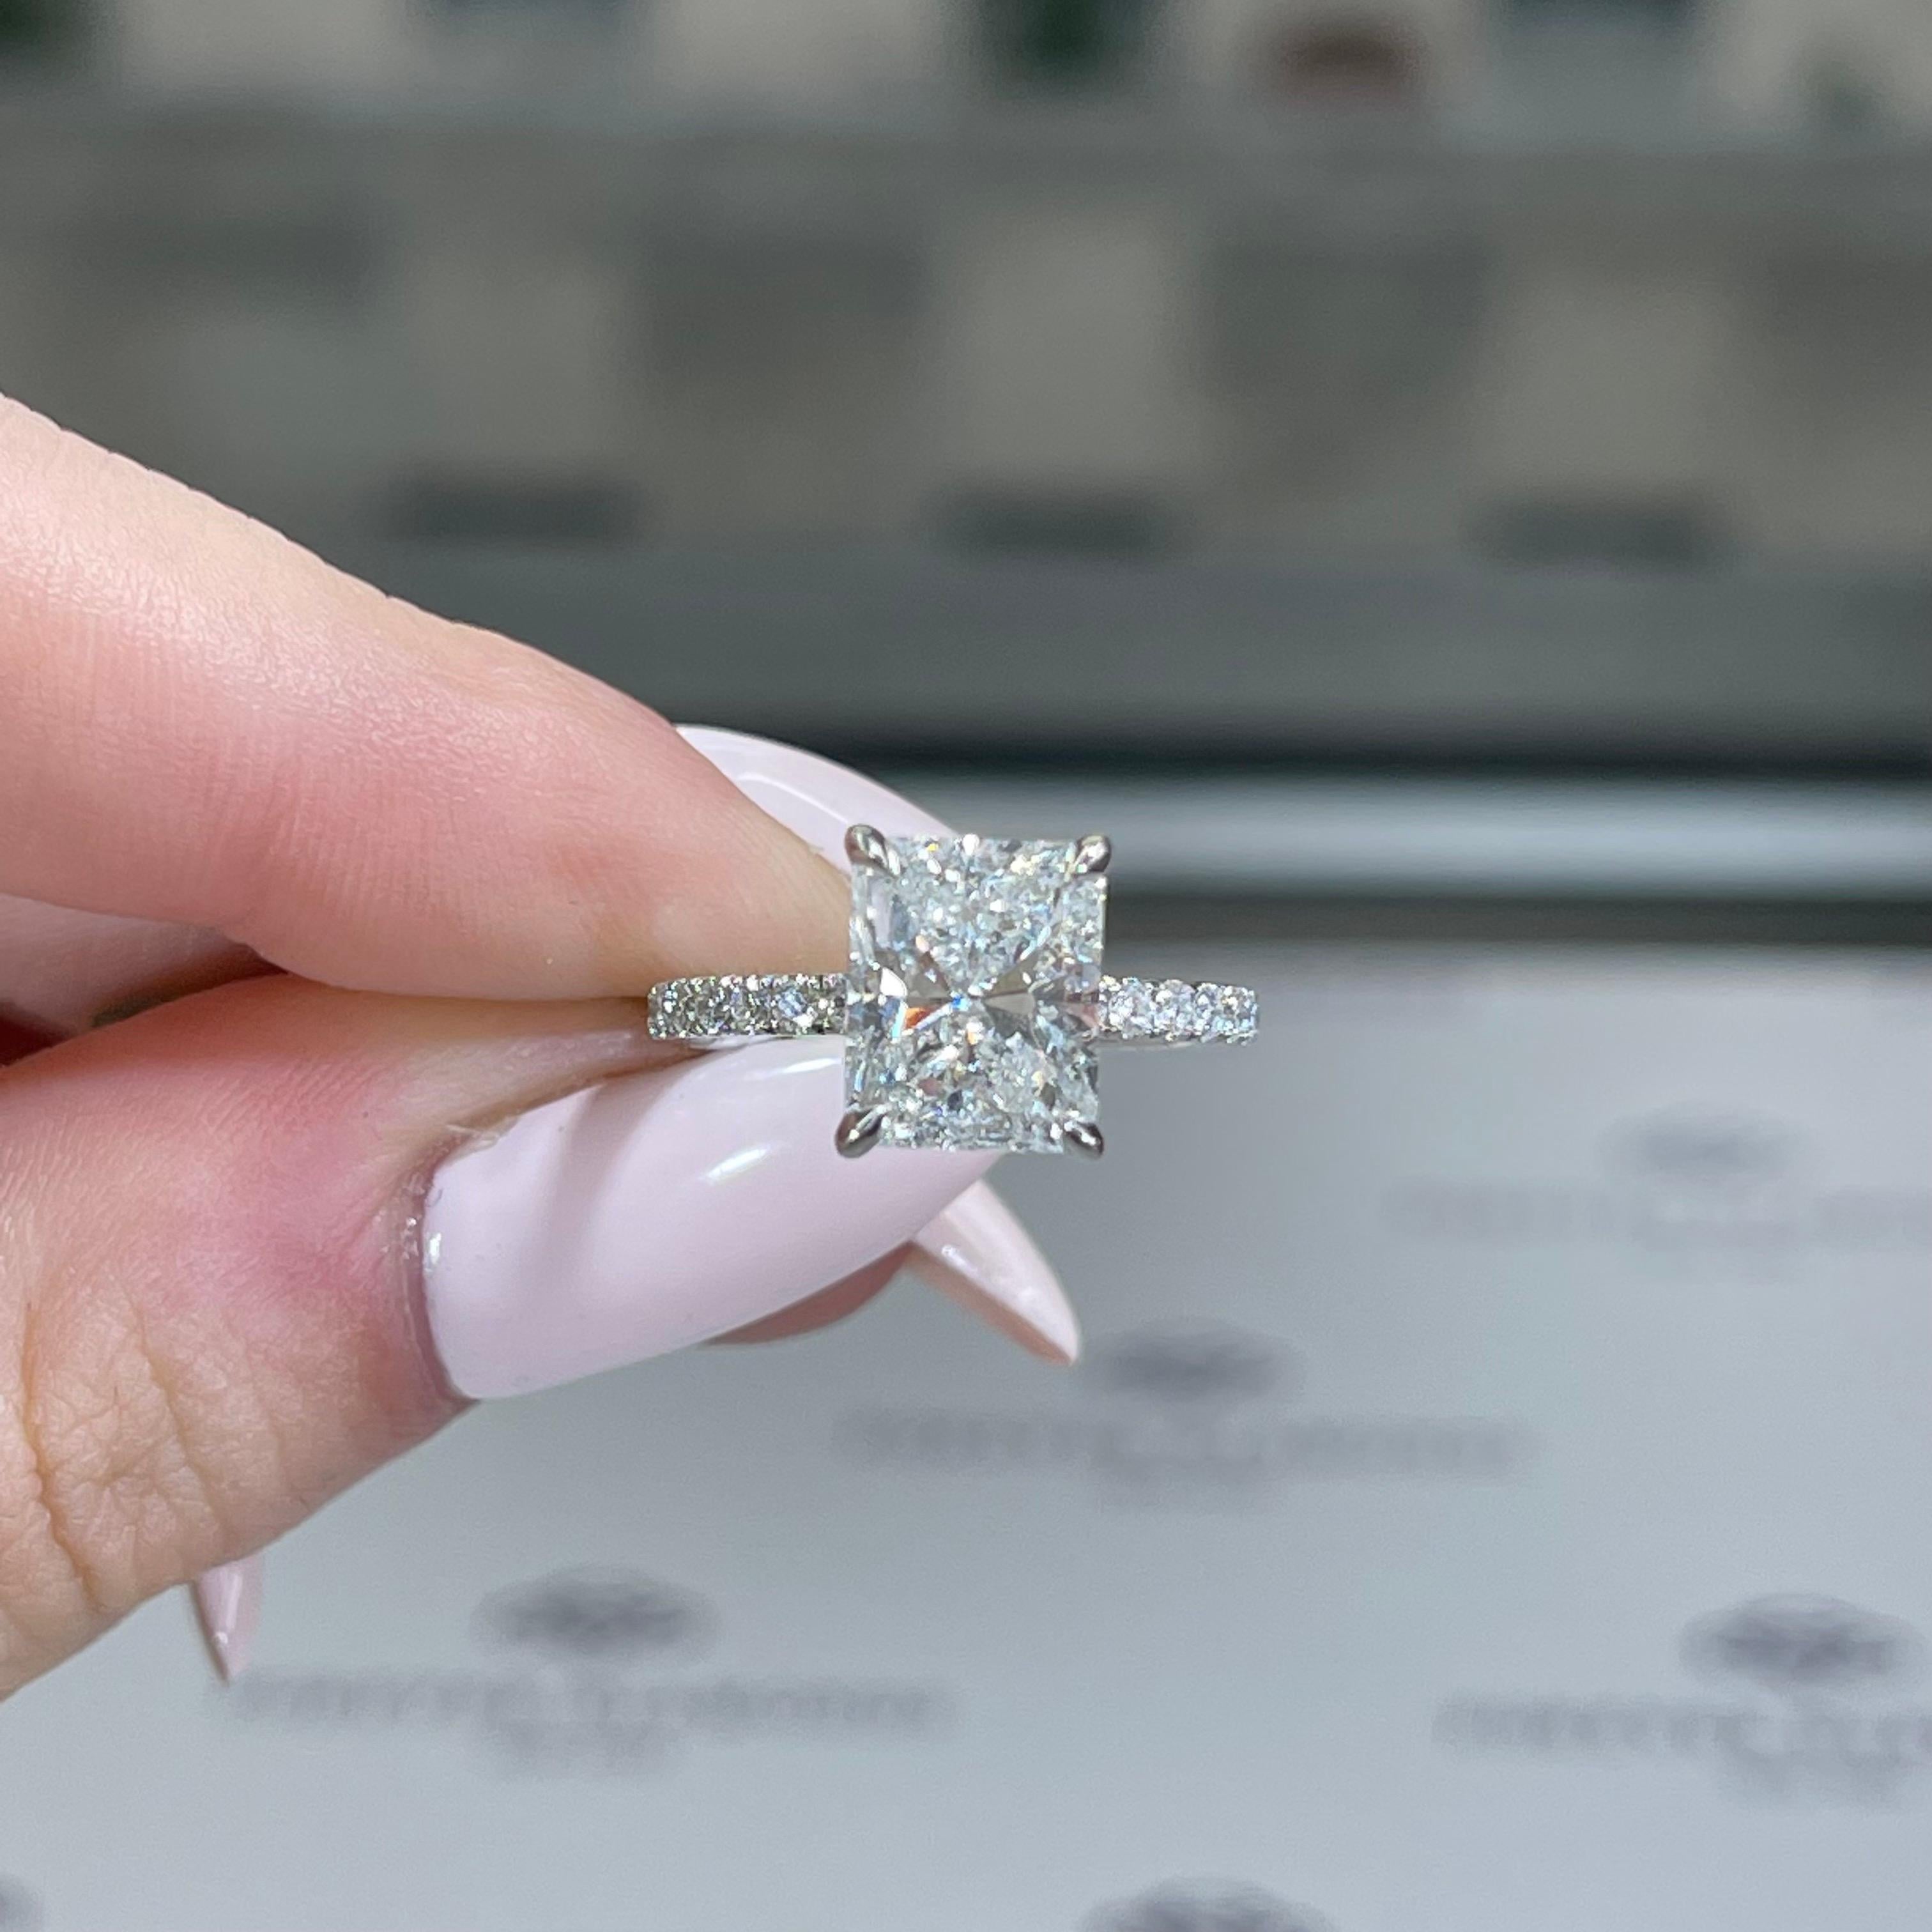 Delicate, yet strong-- The Madison was created for the woman who knows that there is often more to beauty than meets the eye. Breathing new life into the popular pavé solitaire setting, The Madison incorporates a hidden halo and pavé prongs over a